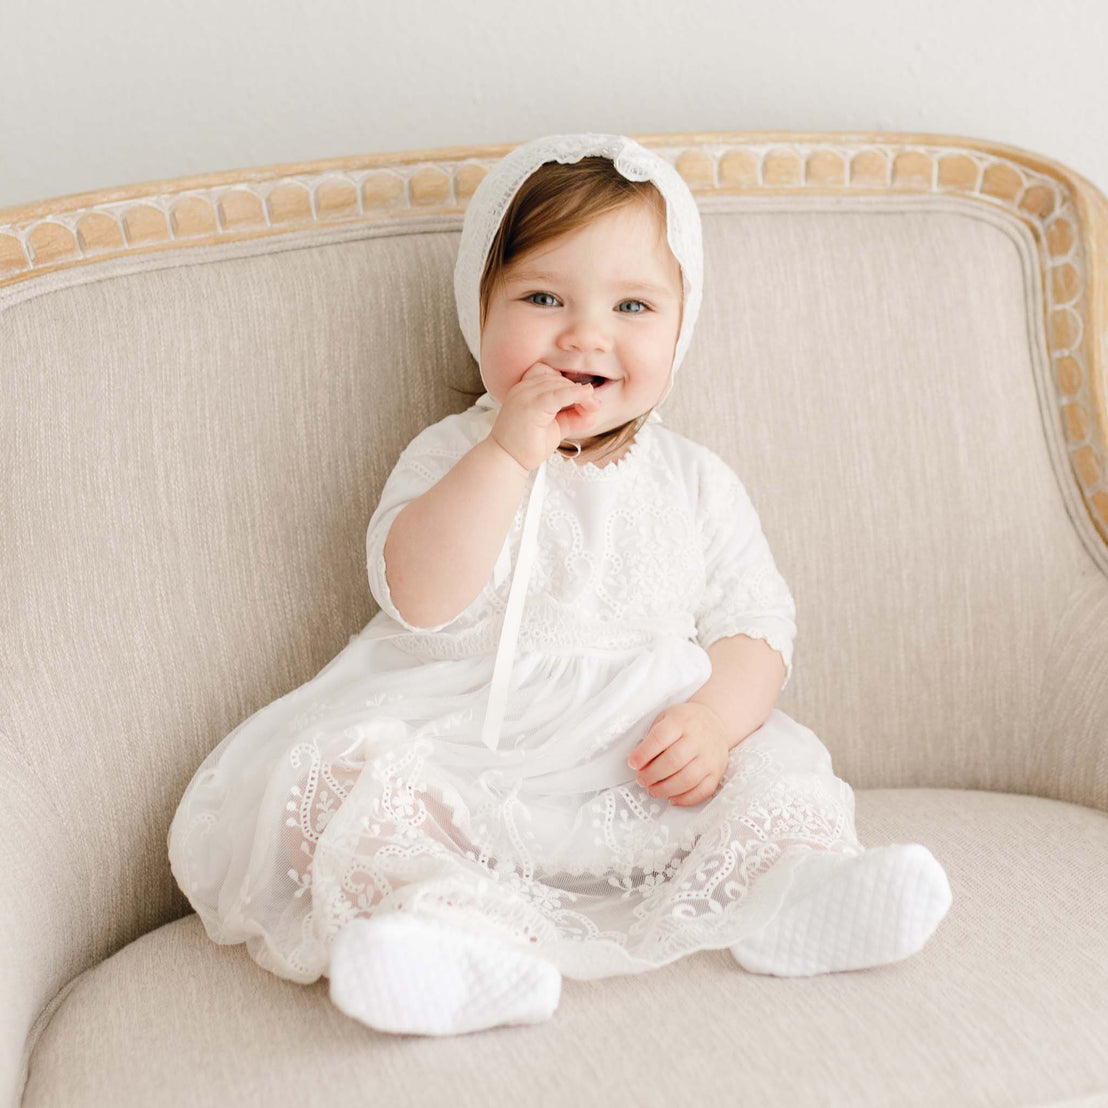 A smiling baby in the Eliza Lace Dress & Headband sits on a beige sofa, looking at the camera.